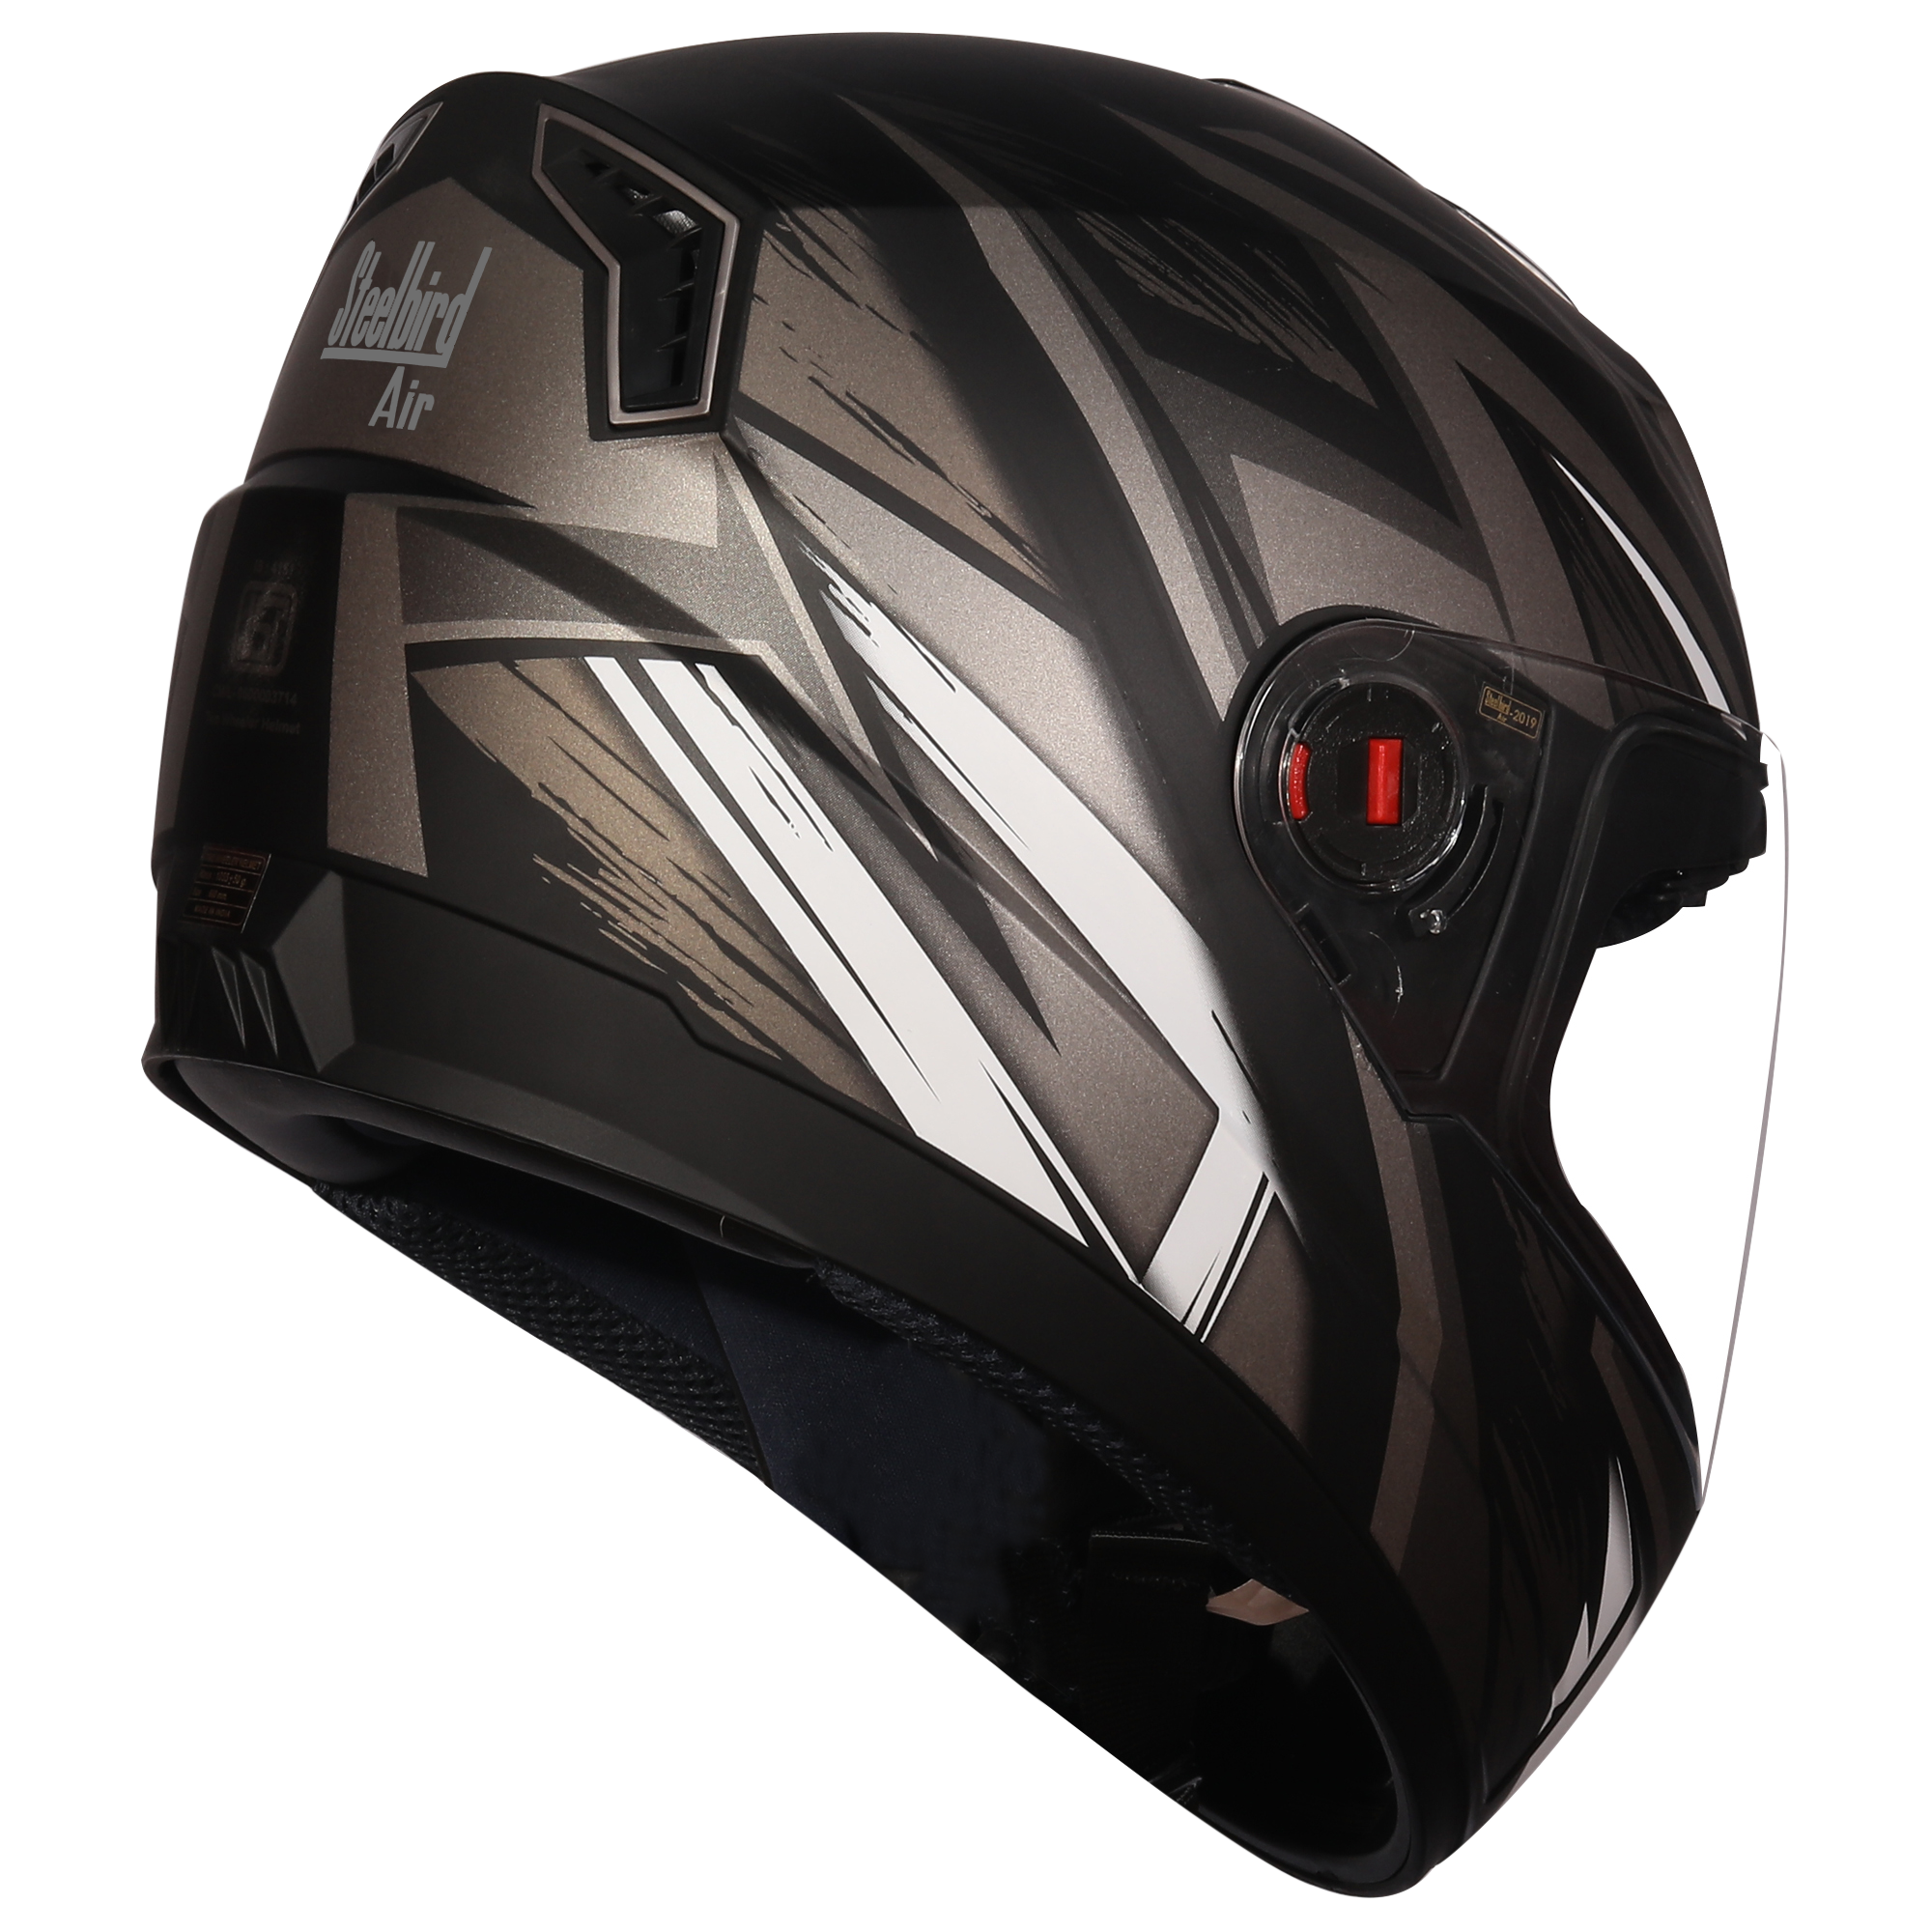 SBA-1 THRYL Mat Black With Grey (Fitted With Clear Visor Extra Rainbow Night Vision Visor Free)